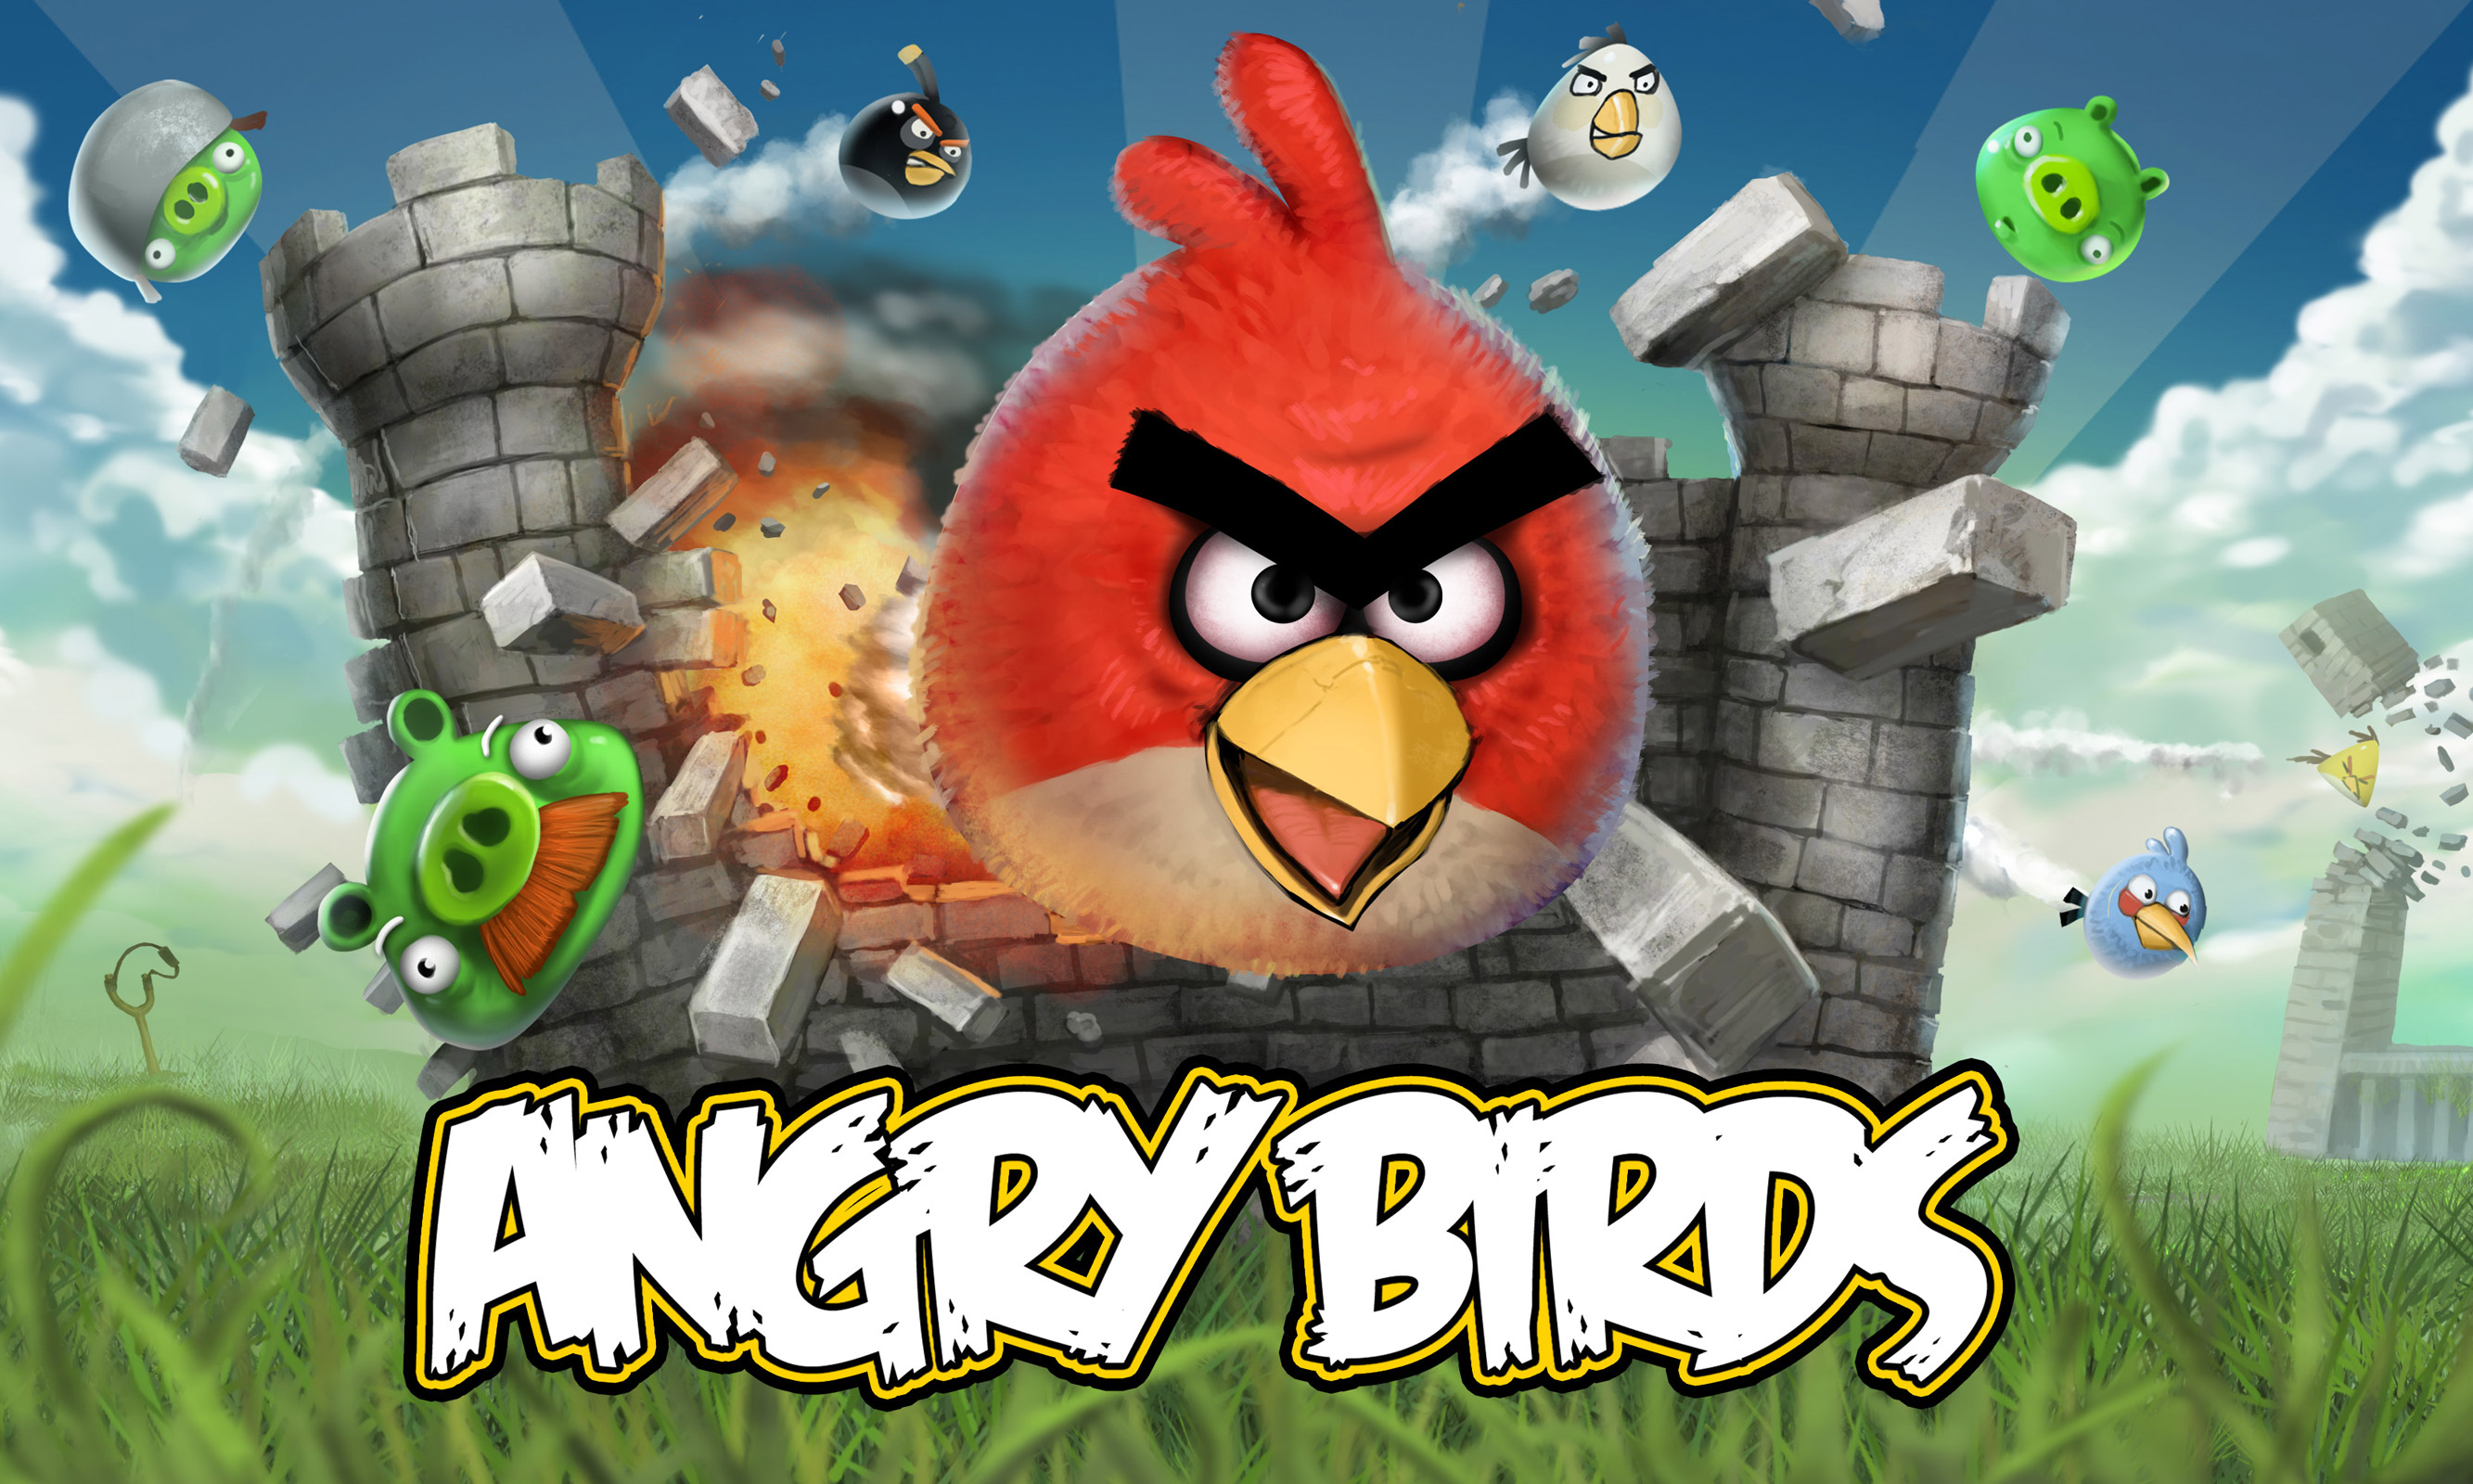 angry birds go 2 download